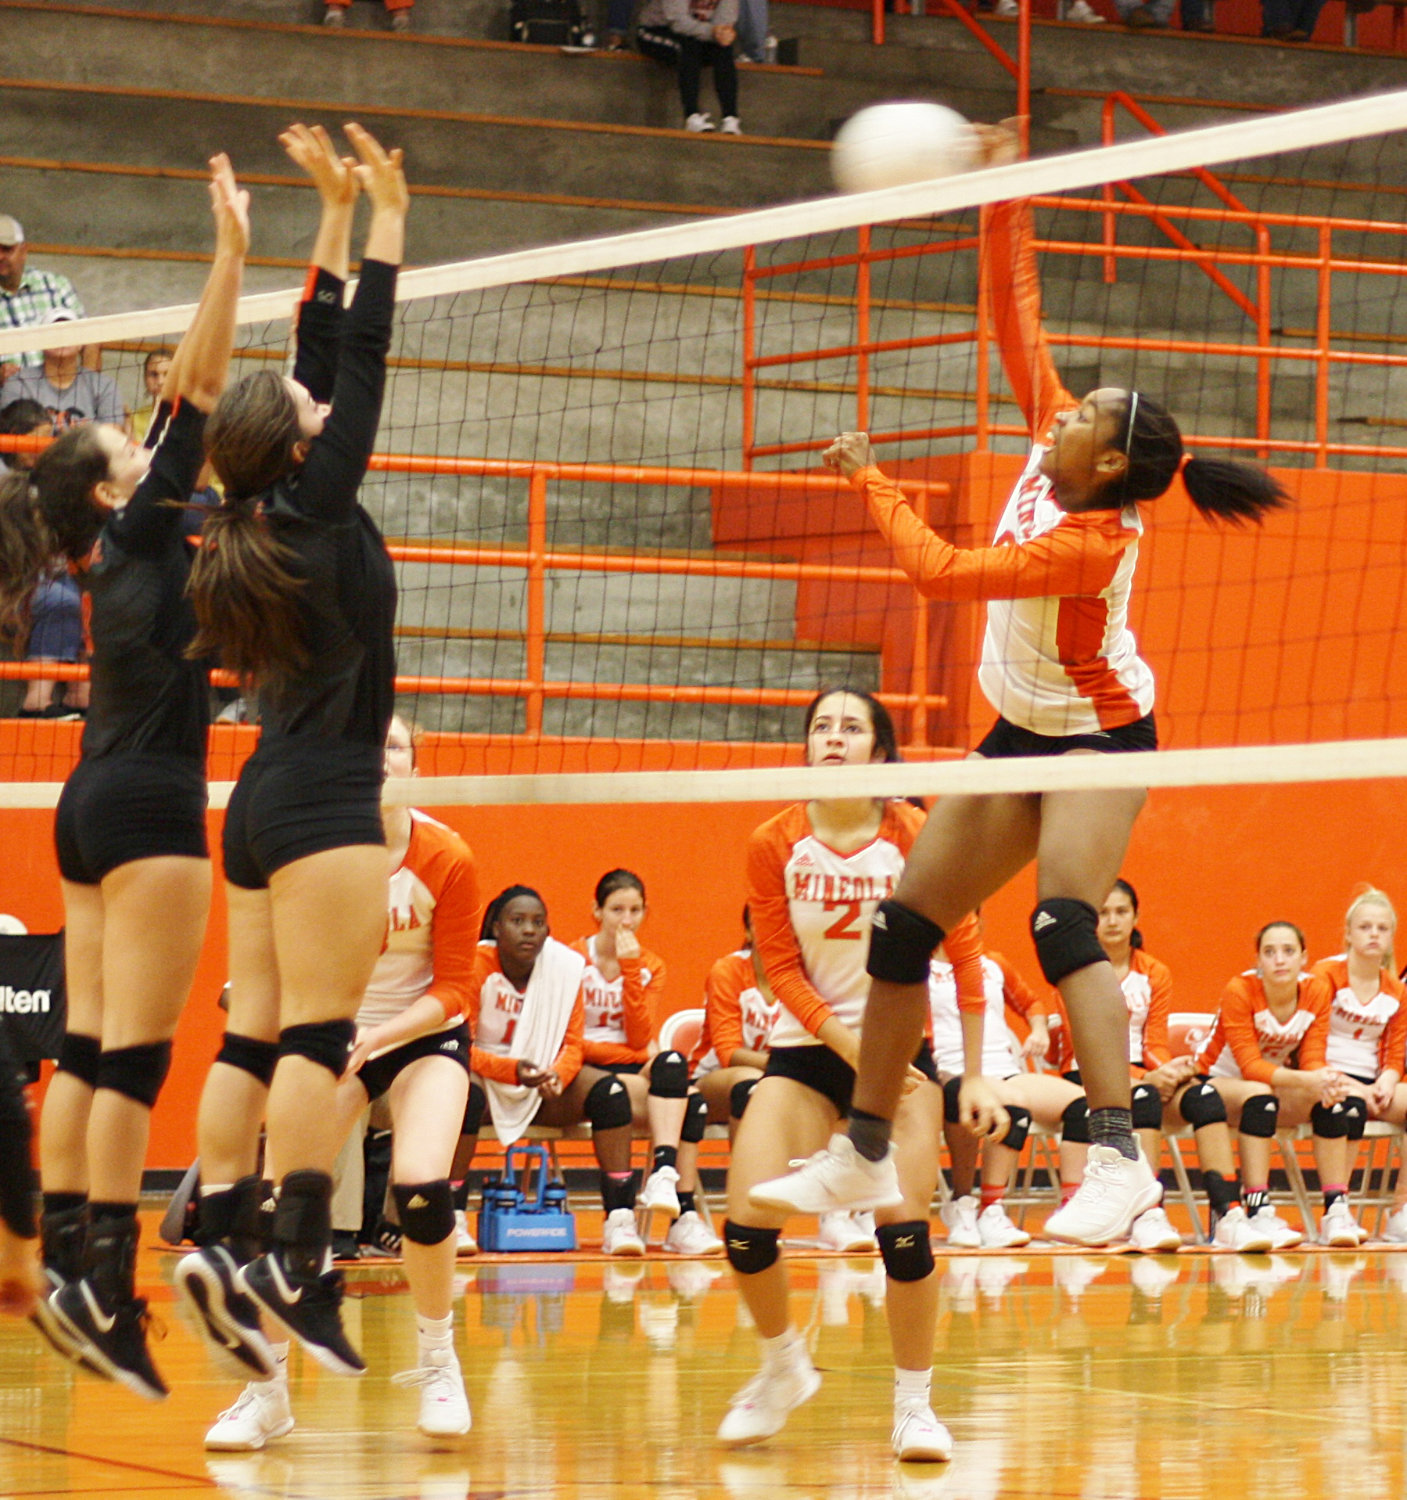 Sabria Dean puts some explosive force on a kill shot in action against the Lady Indians.